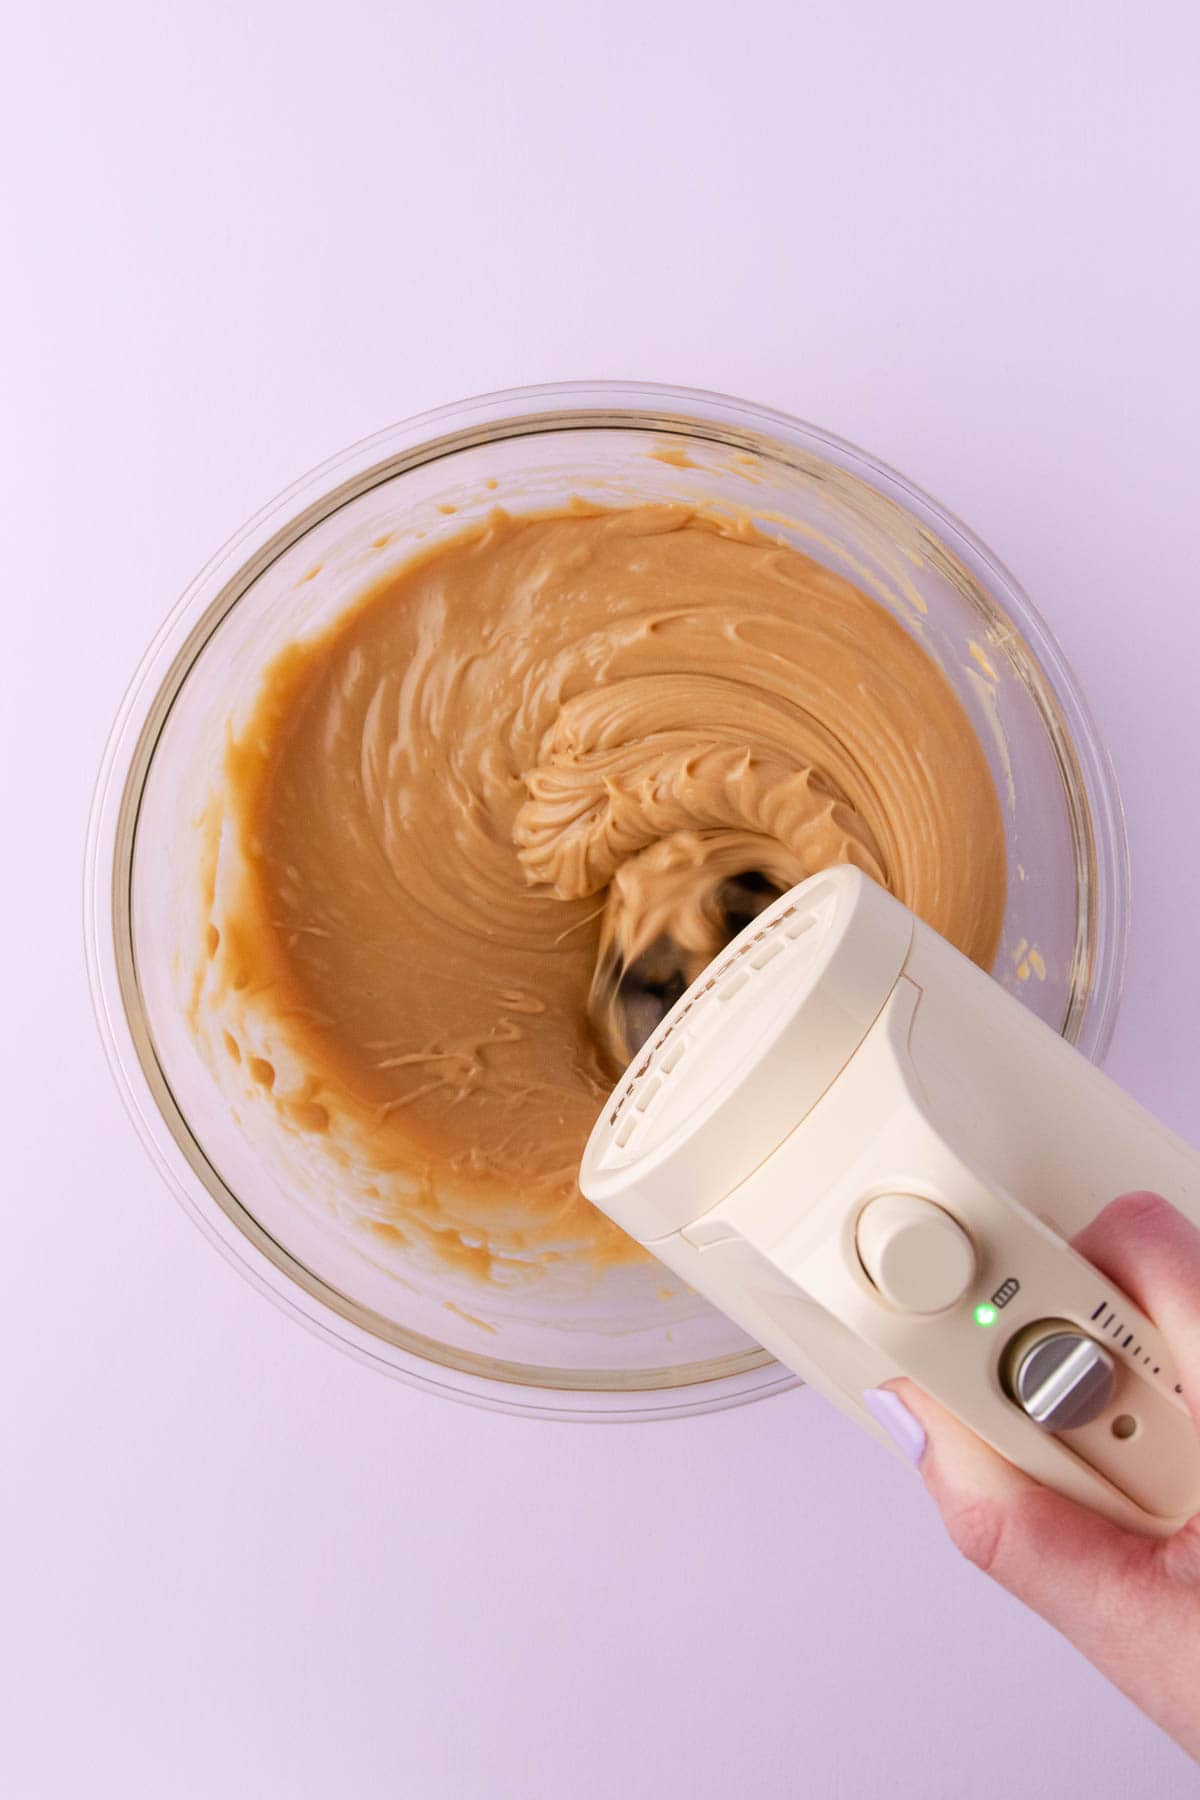 The melted caramilk mixture being beaten with a handheld electric mixer.